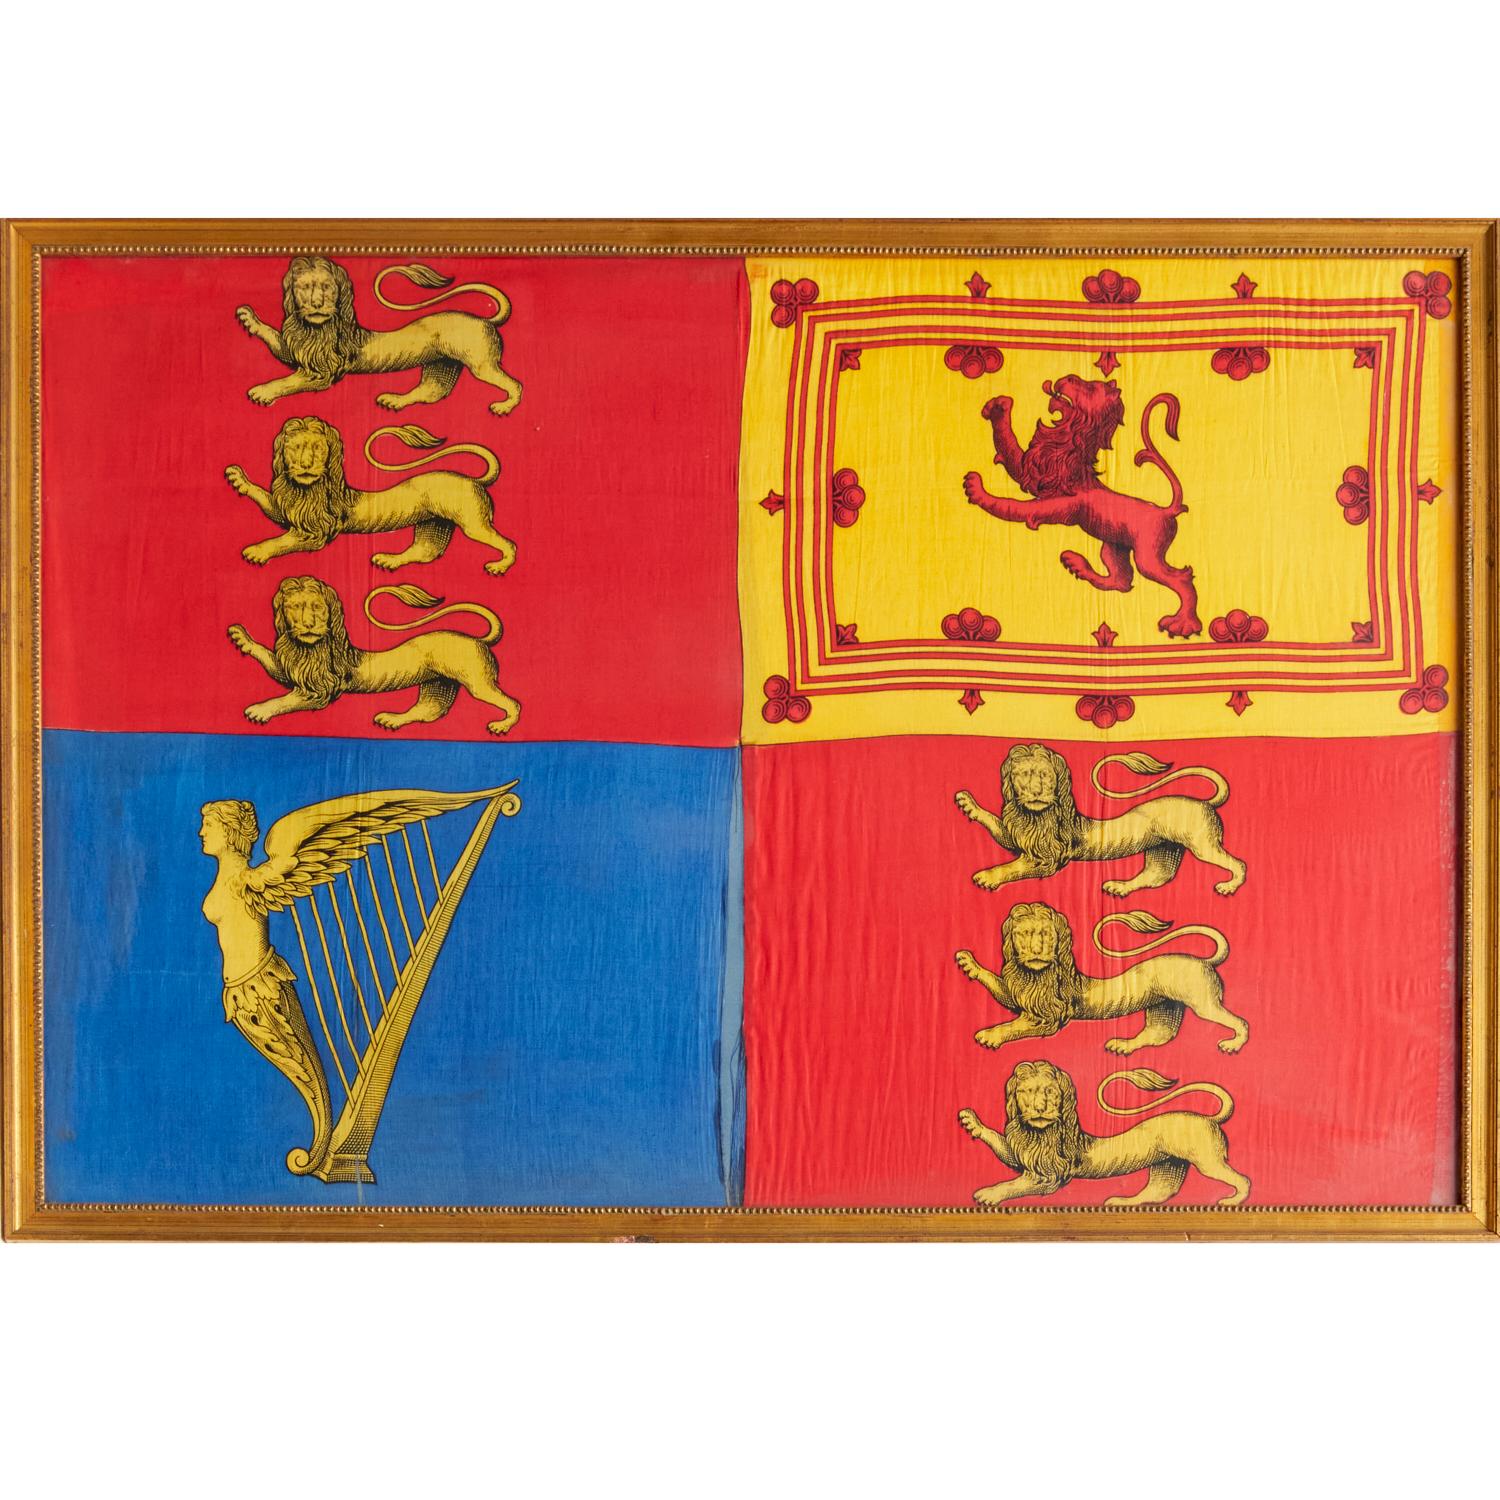 Antique Royal Standard of the United Kingdom in Giltwood Frame and Under Glass For Sale 2